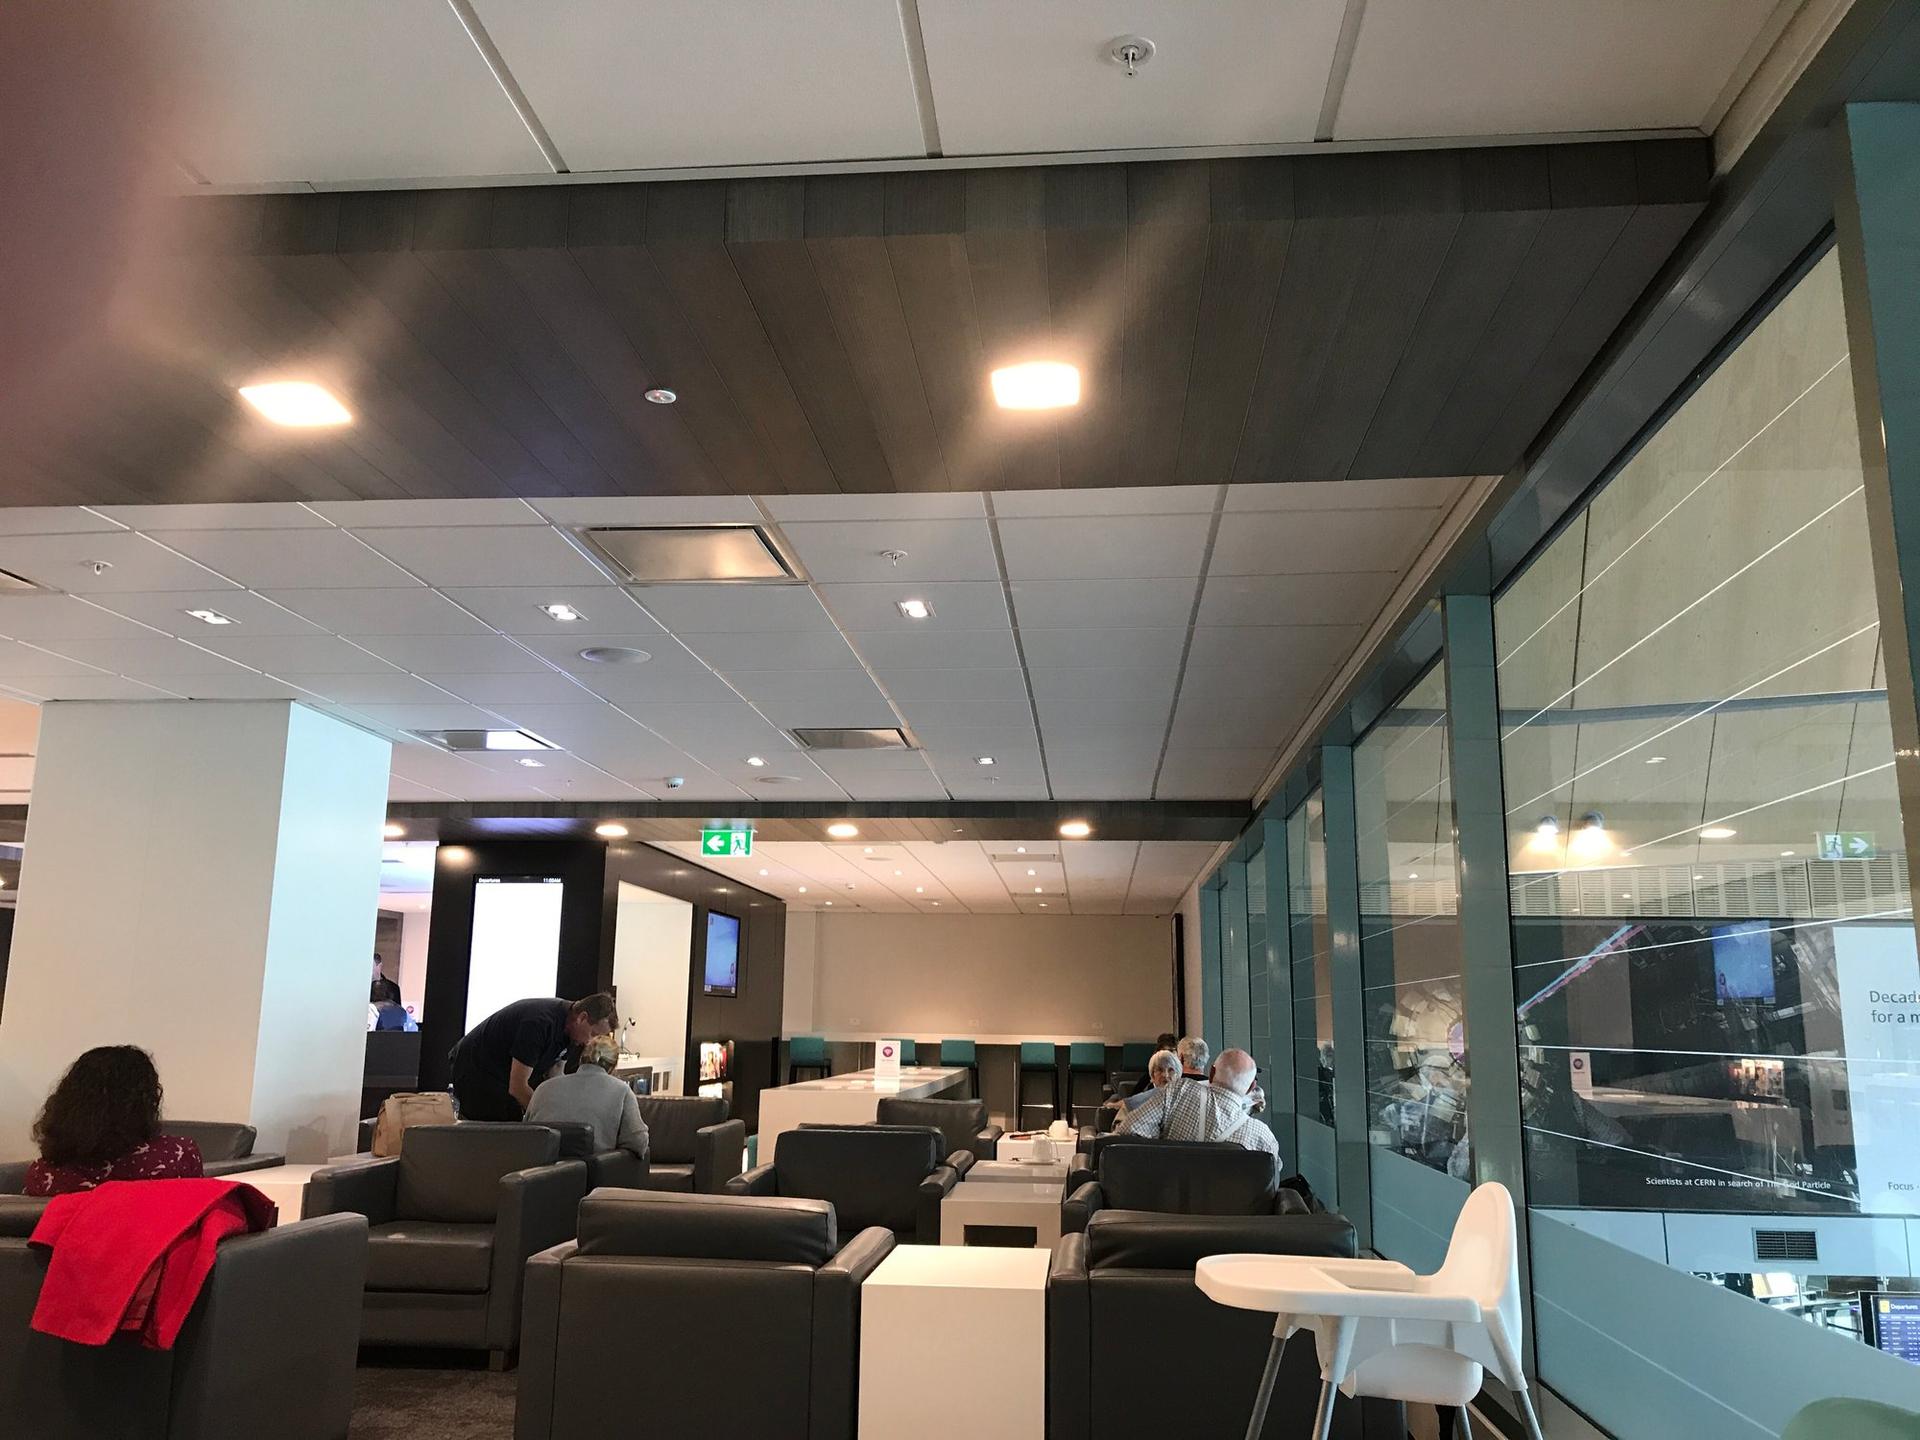 Air New Zealand Regional Lounge image 5 of 8